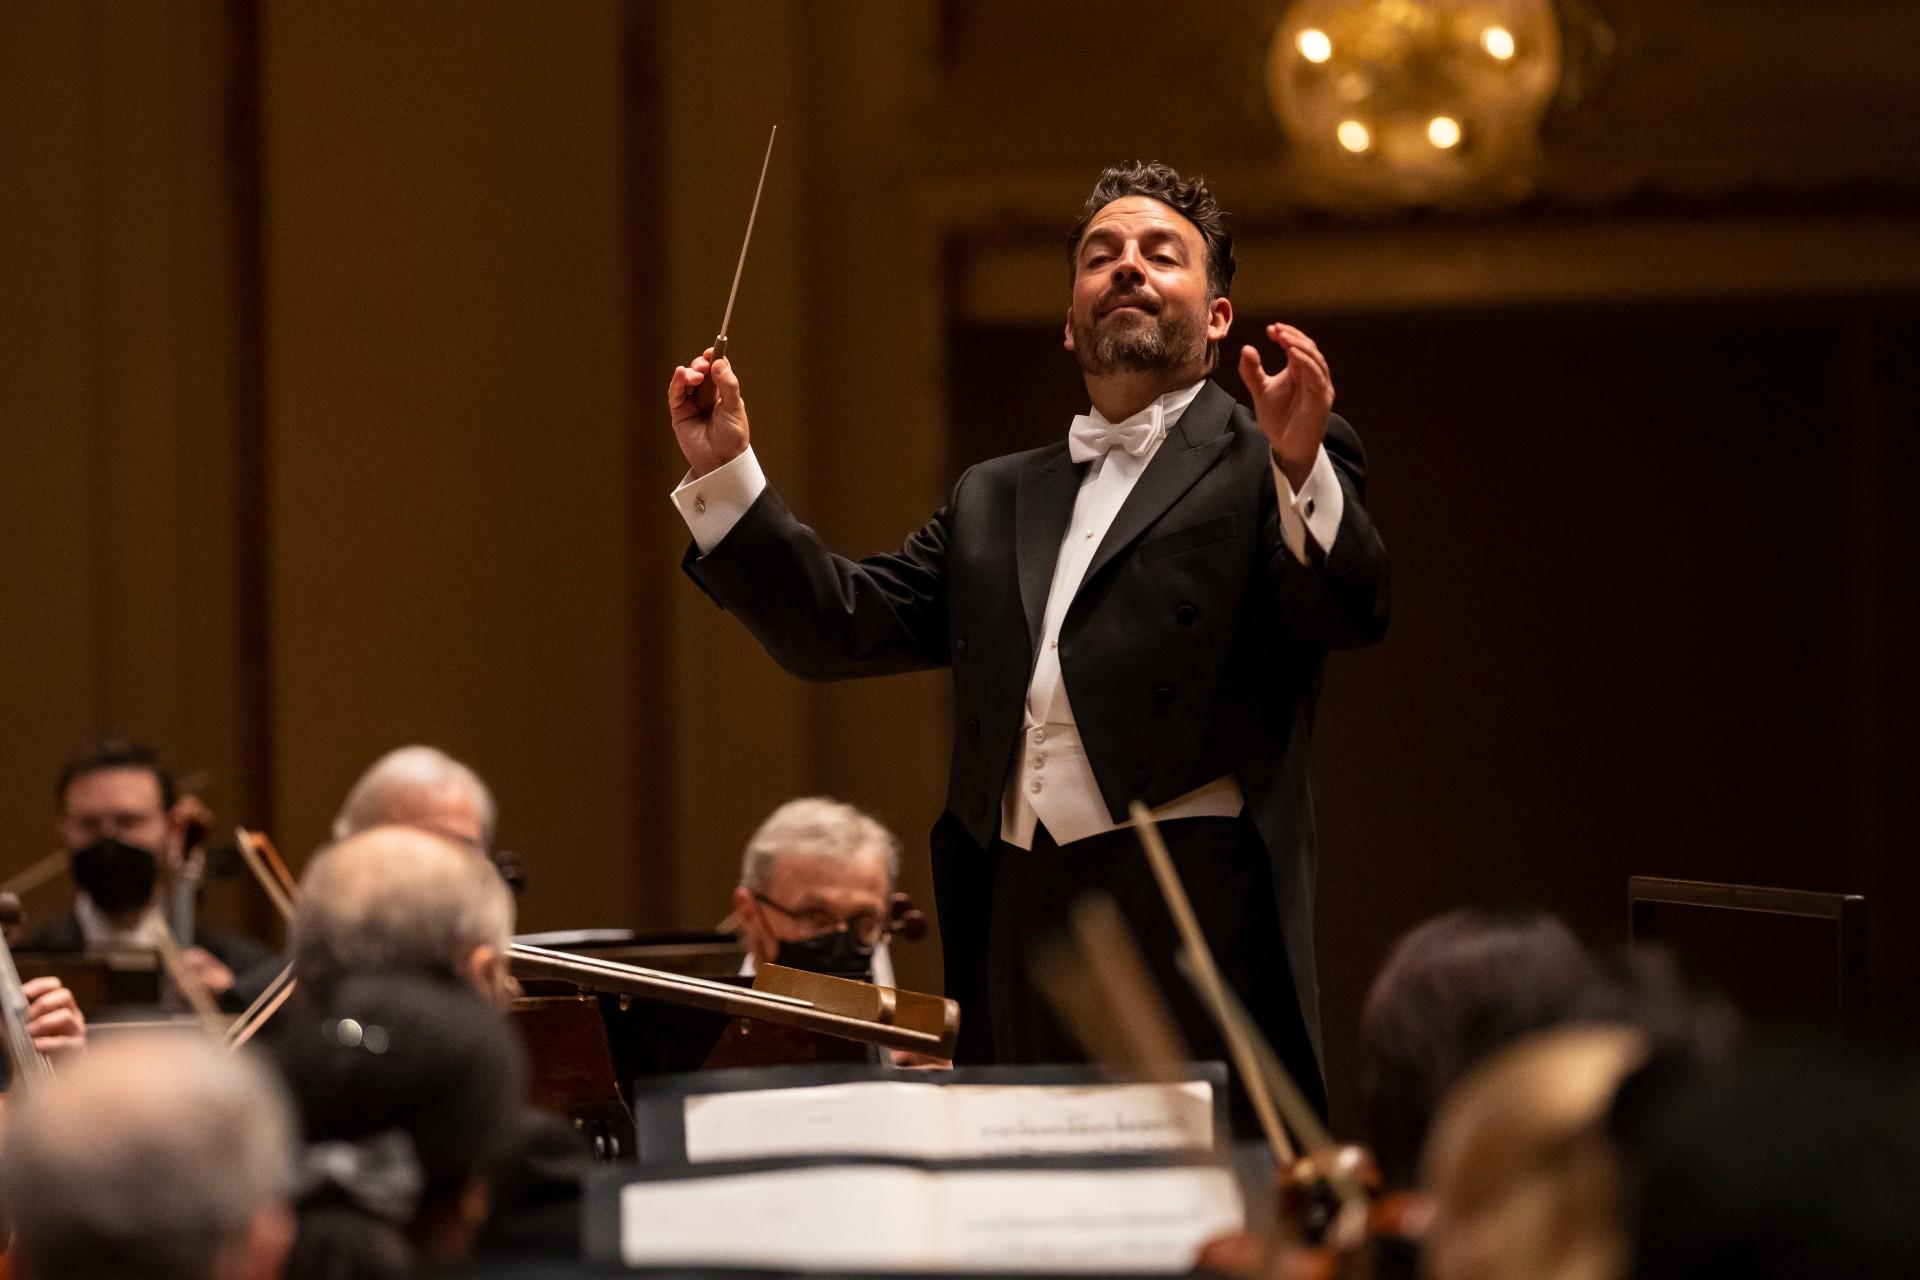 Conductor James Gaffigan leads the Chicago Symphony Orchestra in a program with works by Saint-Saëns, Saint-Saëns Mussorgsky (Orch. Rimsky-Korsakov) and Tchaikovsky.  (Photo credit: Todd Rosenberg)